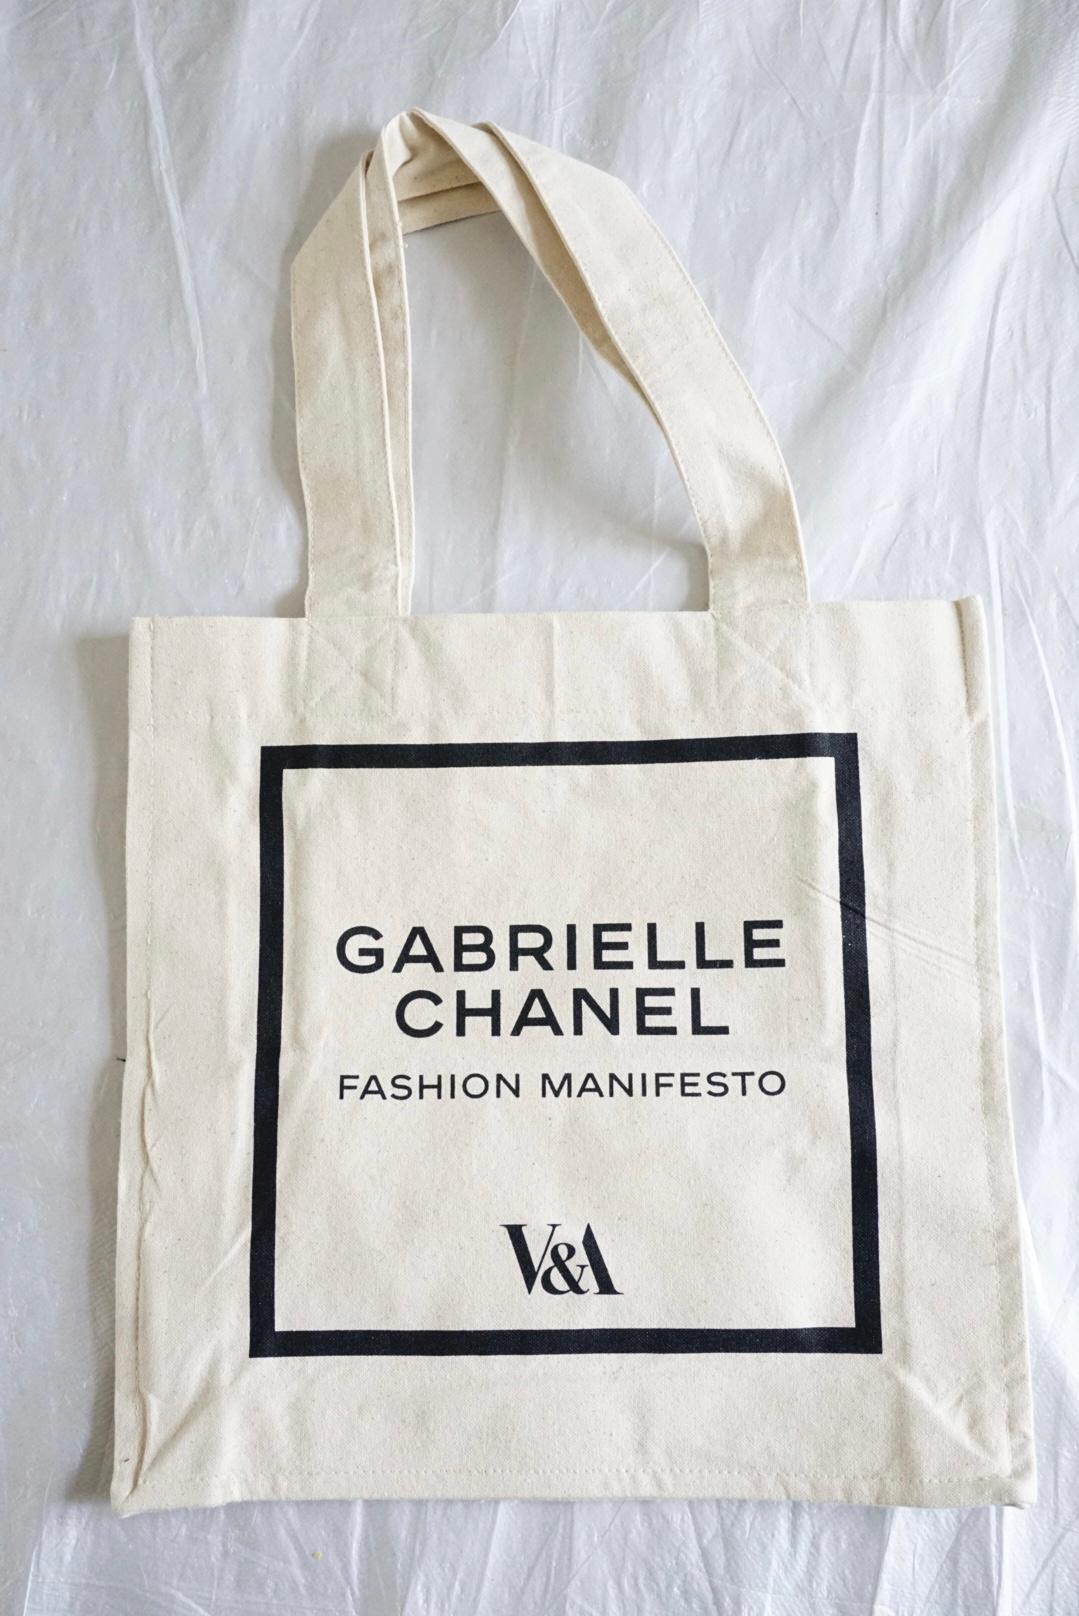 With a design inspired by the chic sophistication of Gabrielle Chanel and her iconic fashions, this tote bag was created to accompany the exhibition, Gabrielle Chanel. Fashion Manifesto at the V&A South Kensington.

Featuring a unique size in the